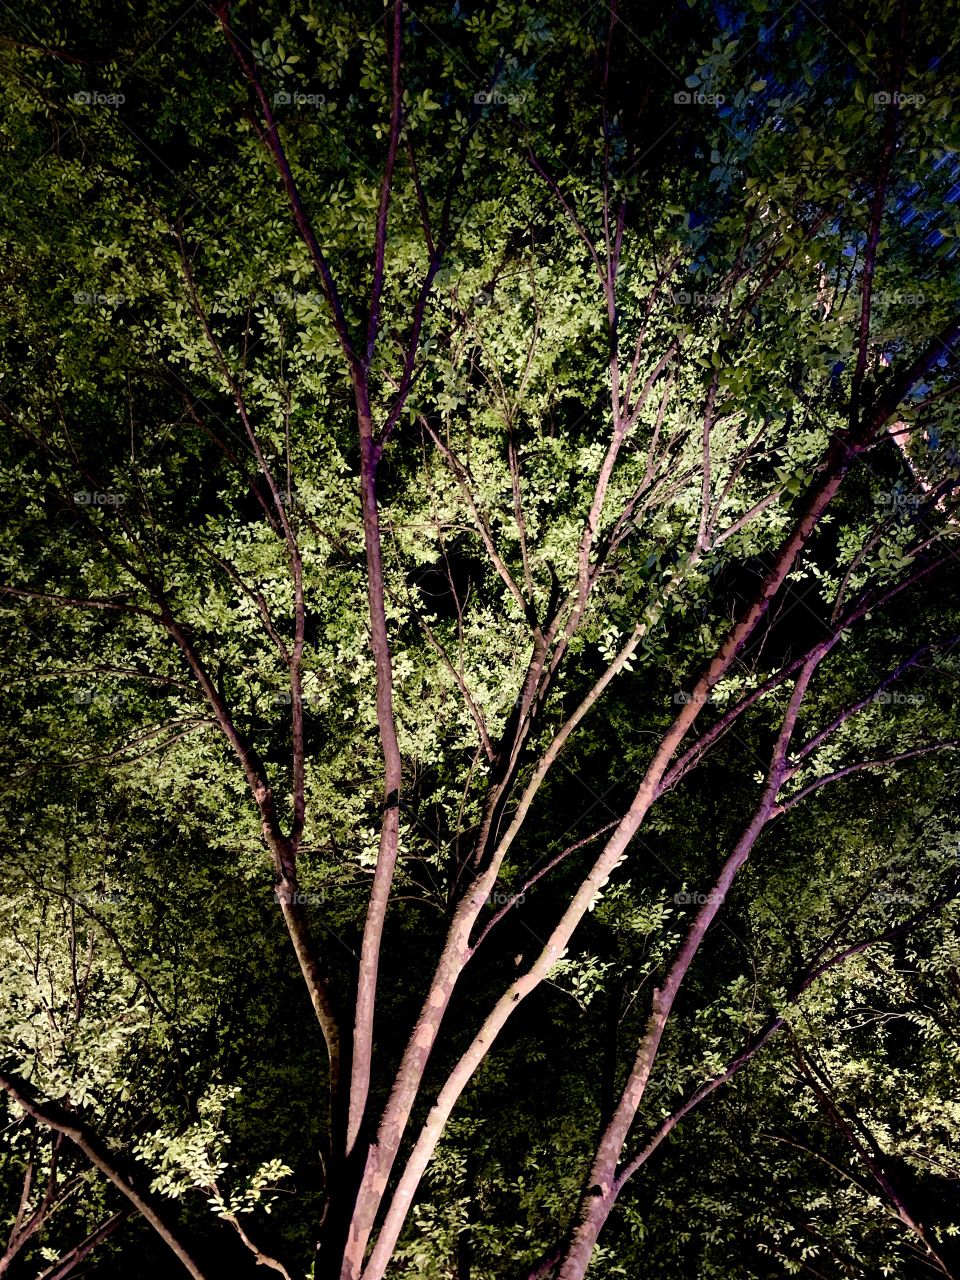 A green tree lit up at night